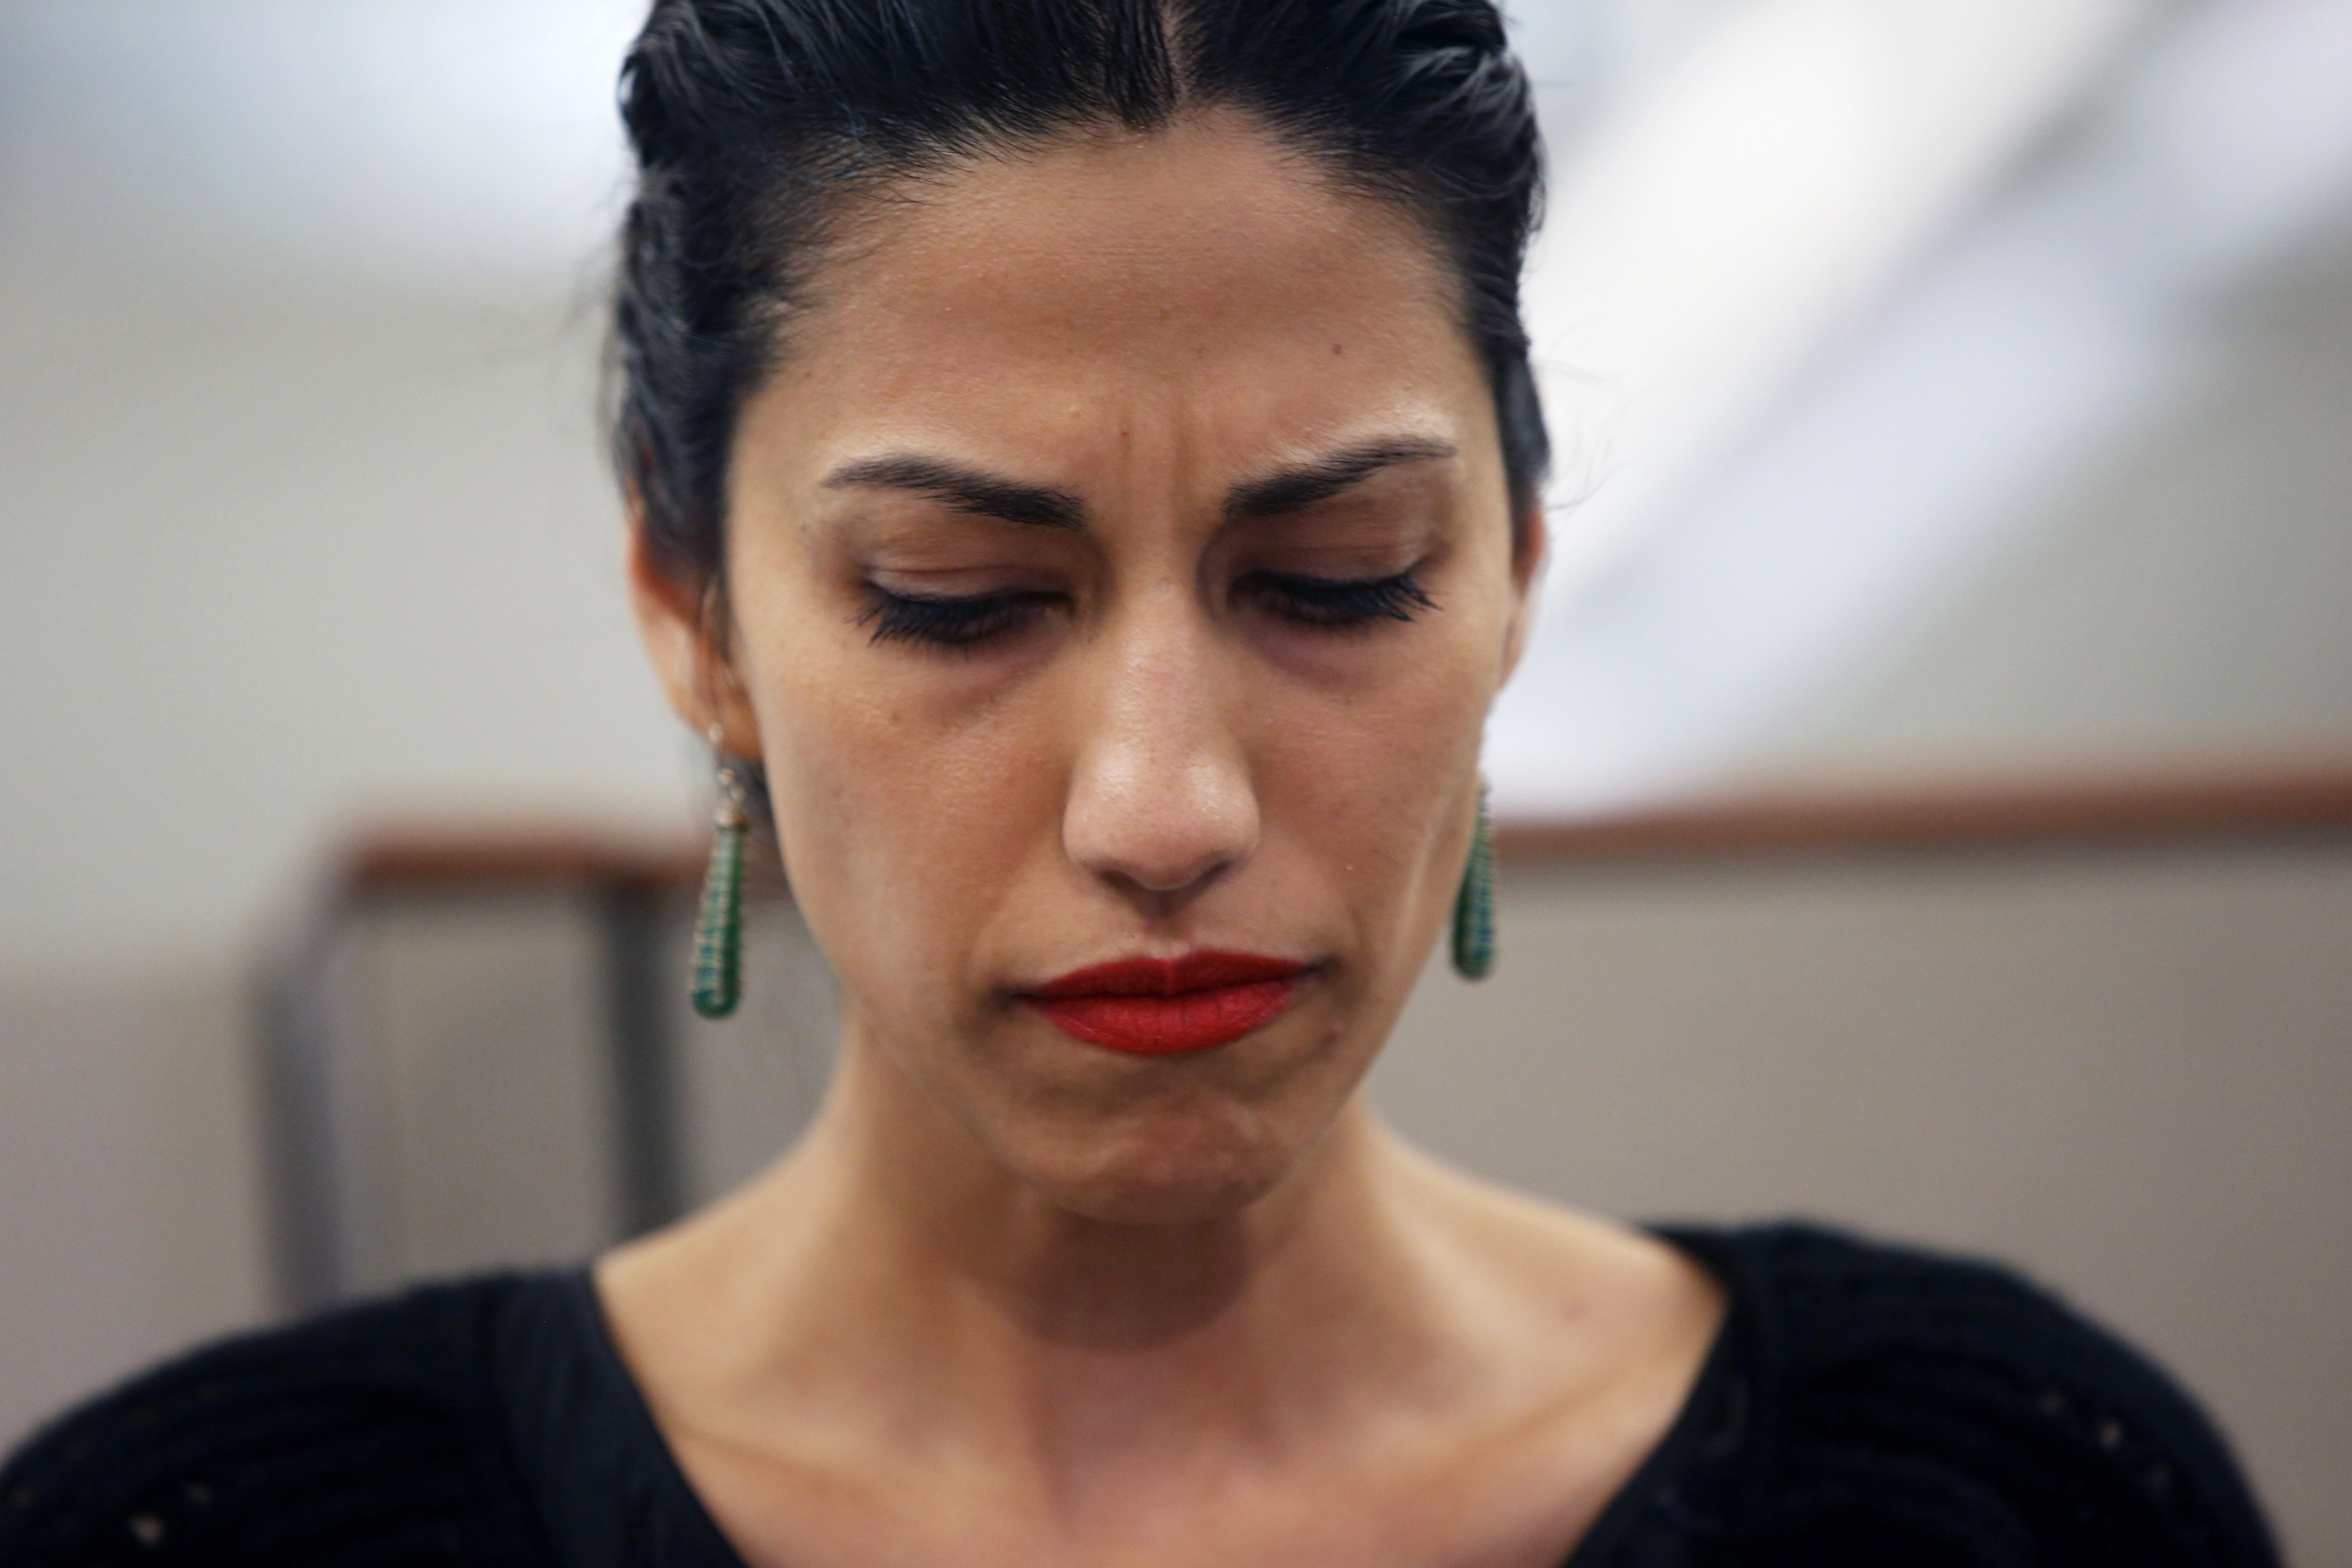  Huma Abedin, wife of Anthony Weiner, a leading candidate for New York City mayor, listens as her husband speaks at a press conference on July 23, 2013 in New York City | Source: Getty Images